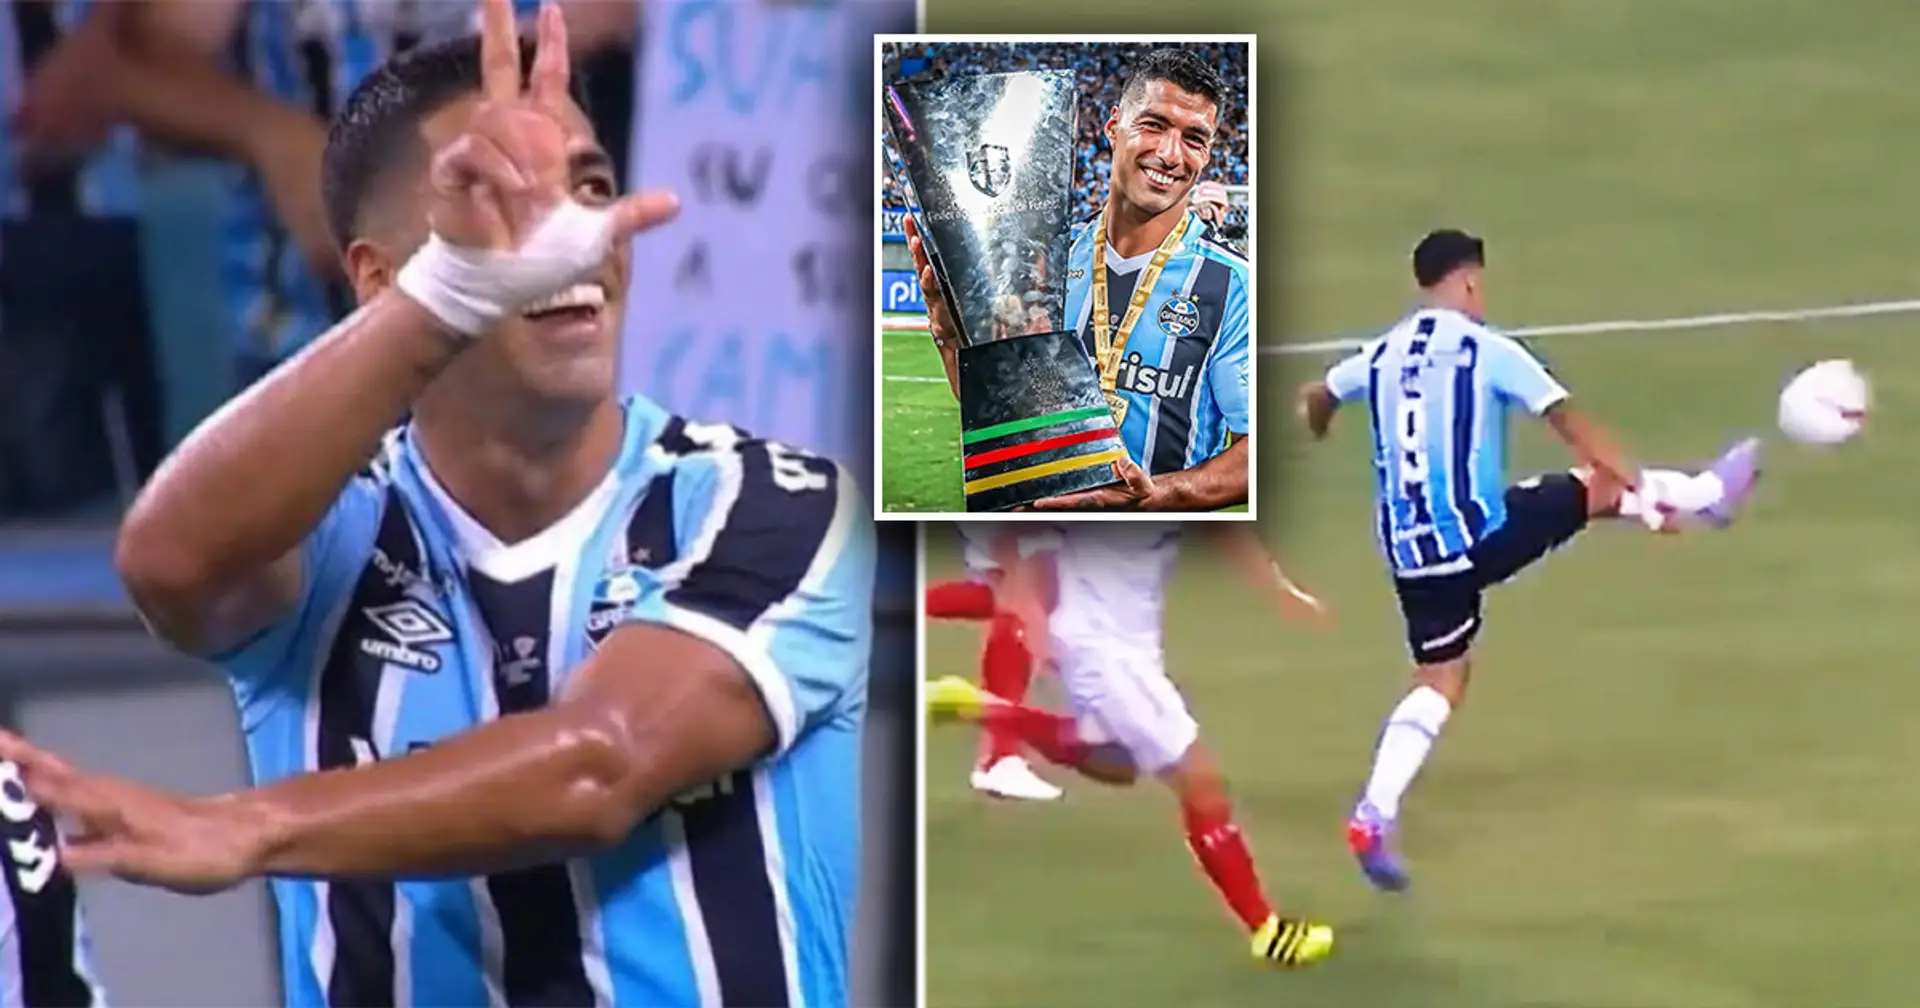 Luis Suarez wins trophy after scoring 38-minute hat-trick in Gremio debut, two goals are beauties